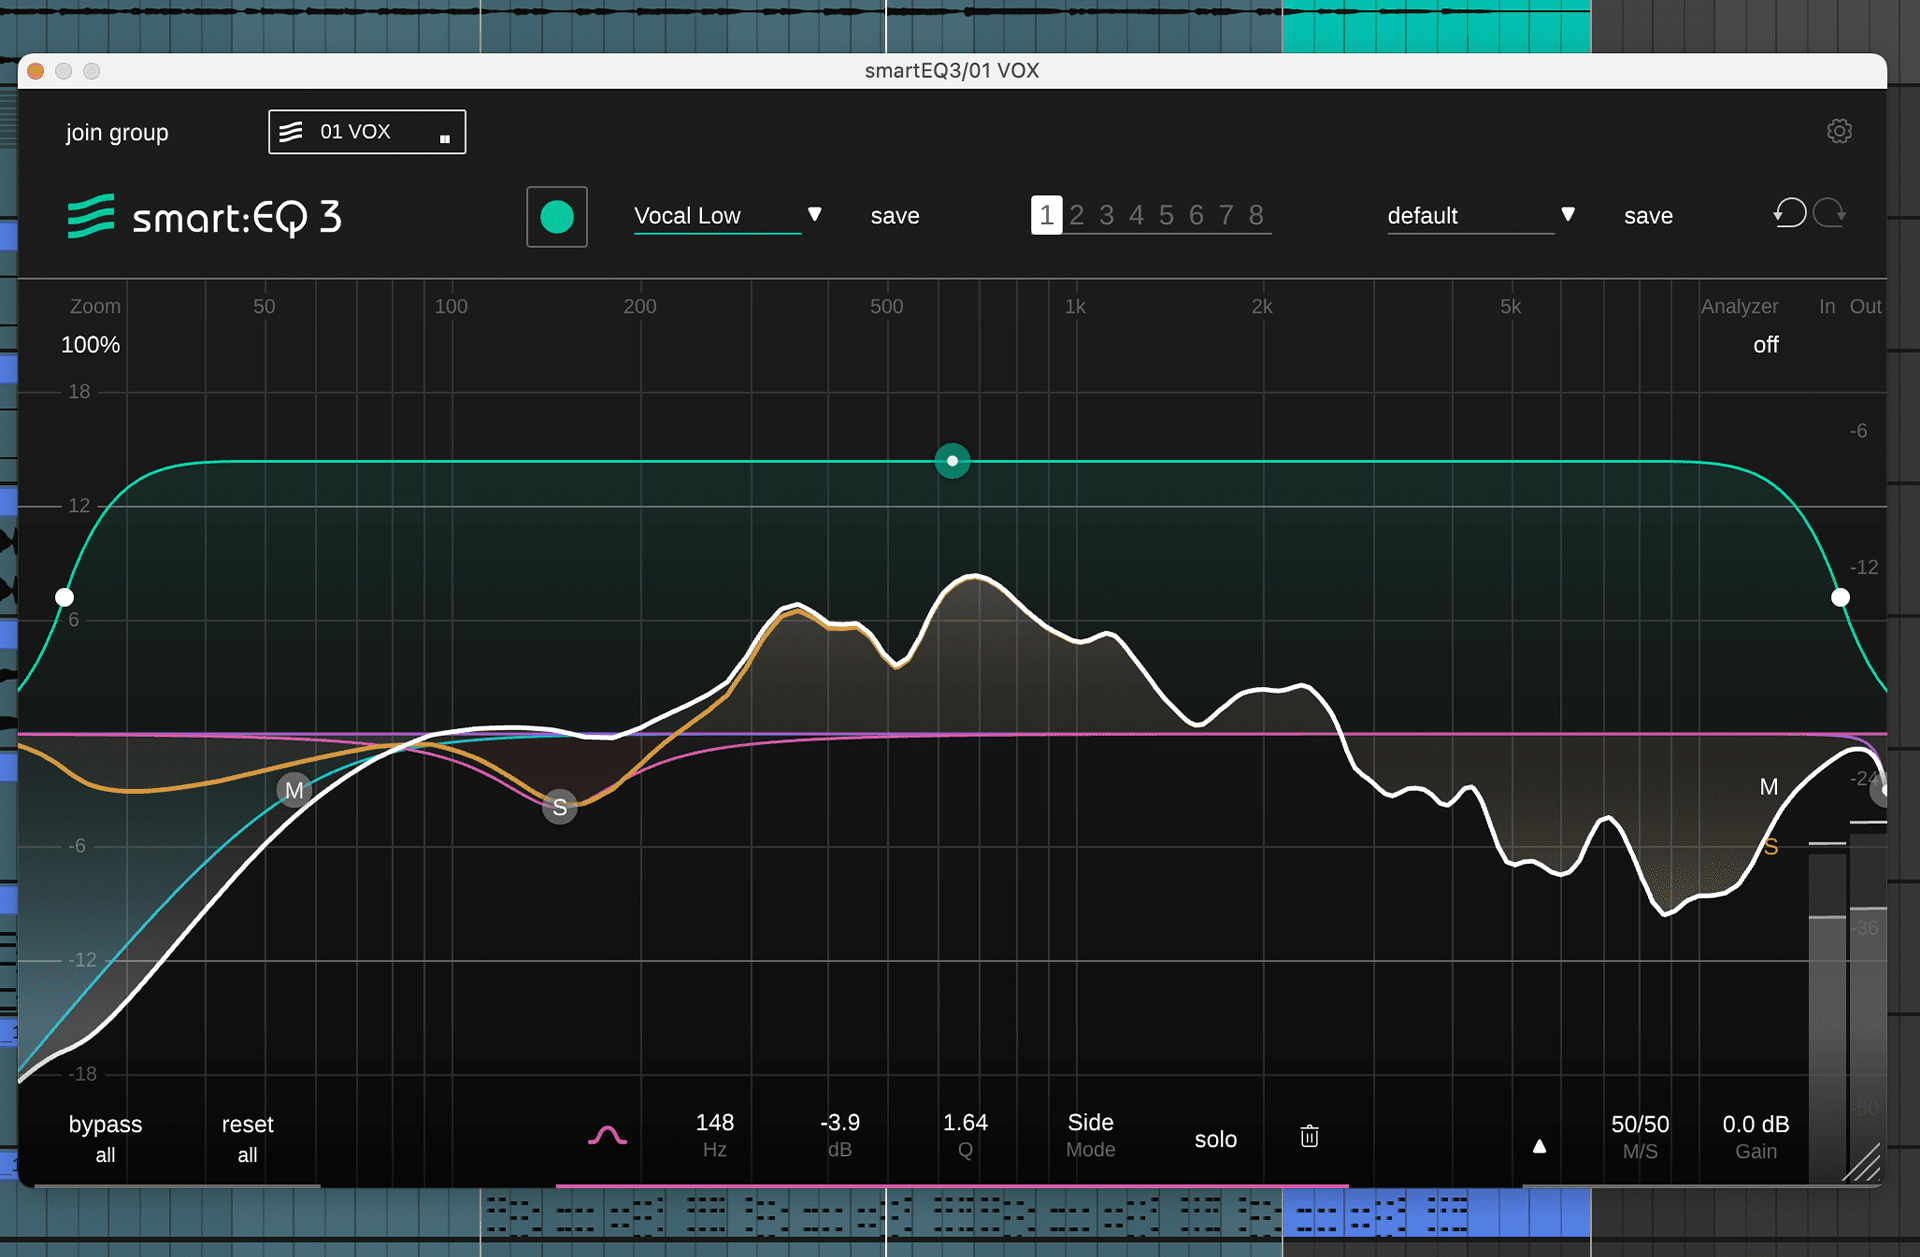 Placing a low-cut filter in sonible's smart:EQ 3